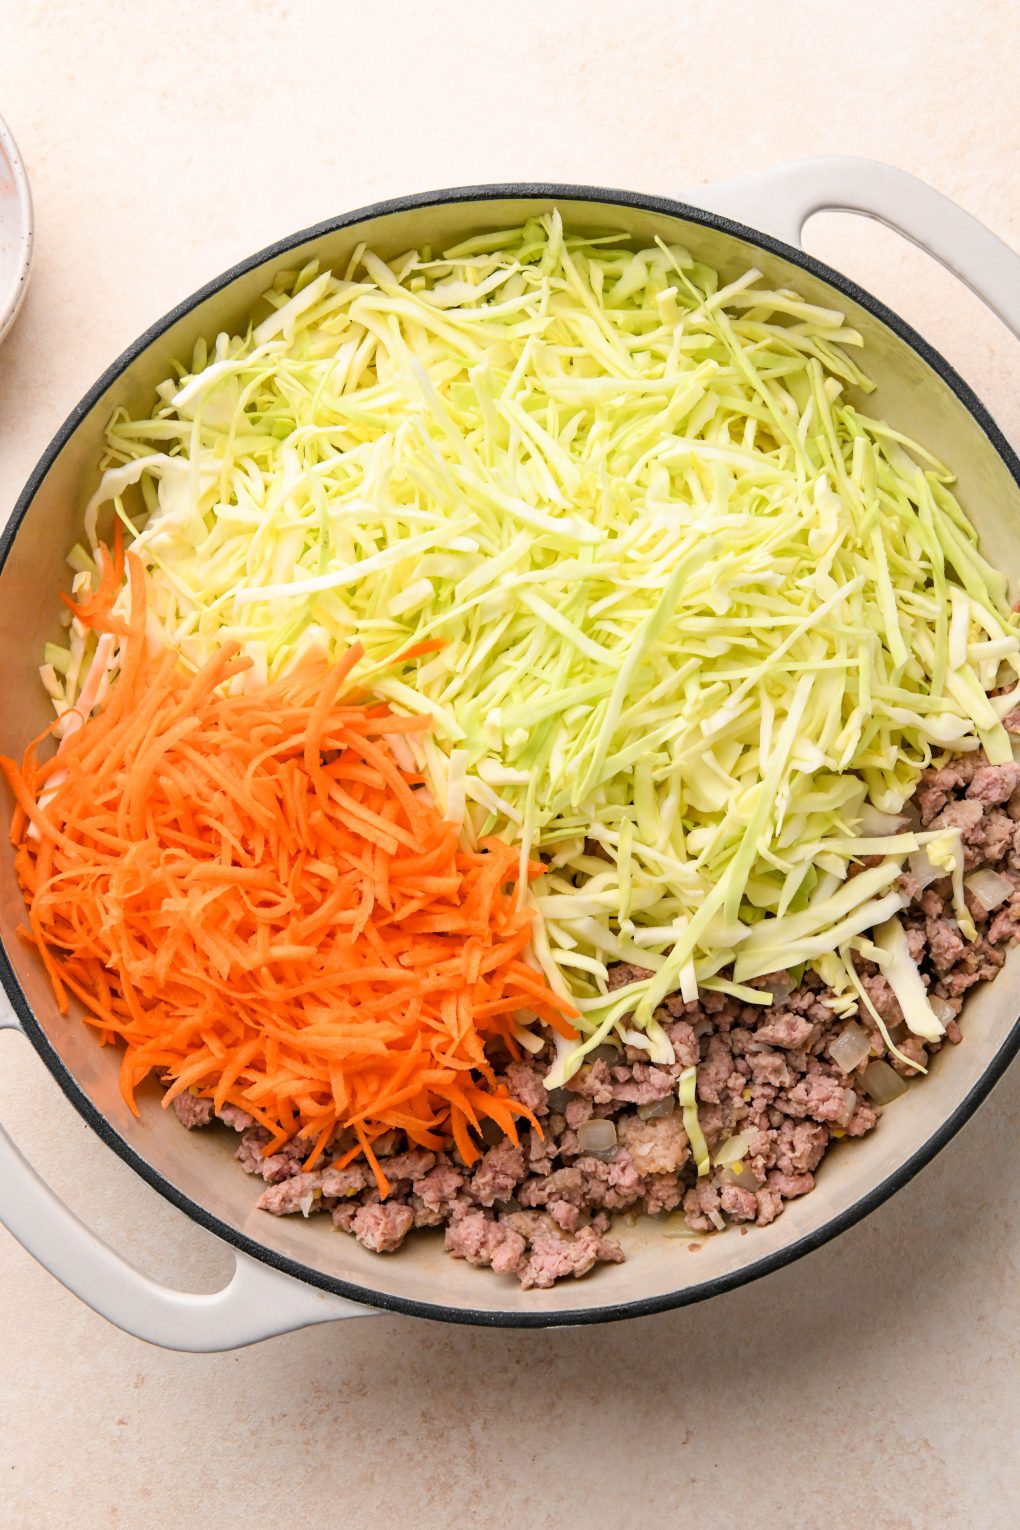 How to make Egg Roll in a Bowl: Shredded cabbage and carrots added to the skillet.